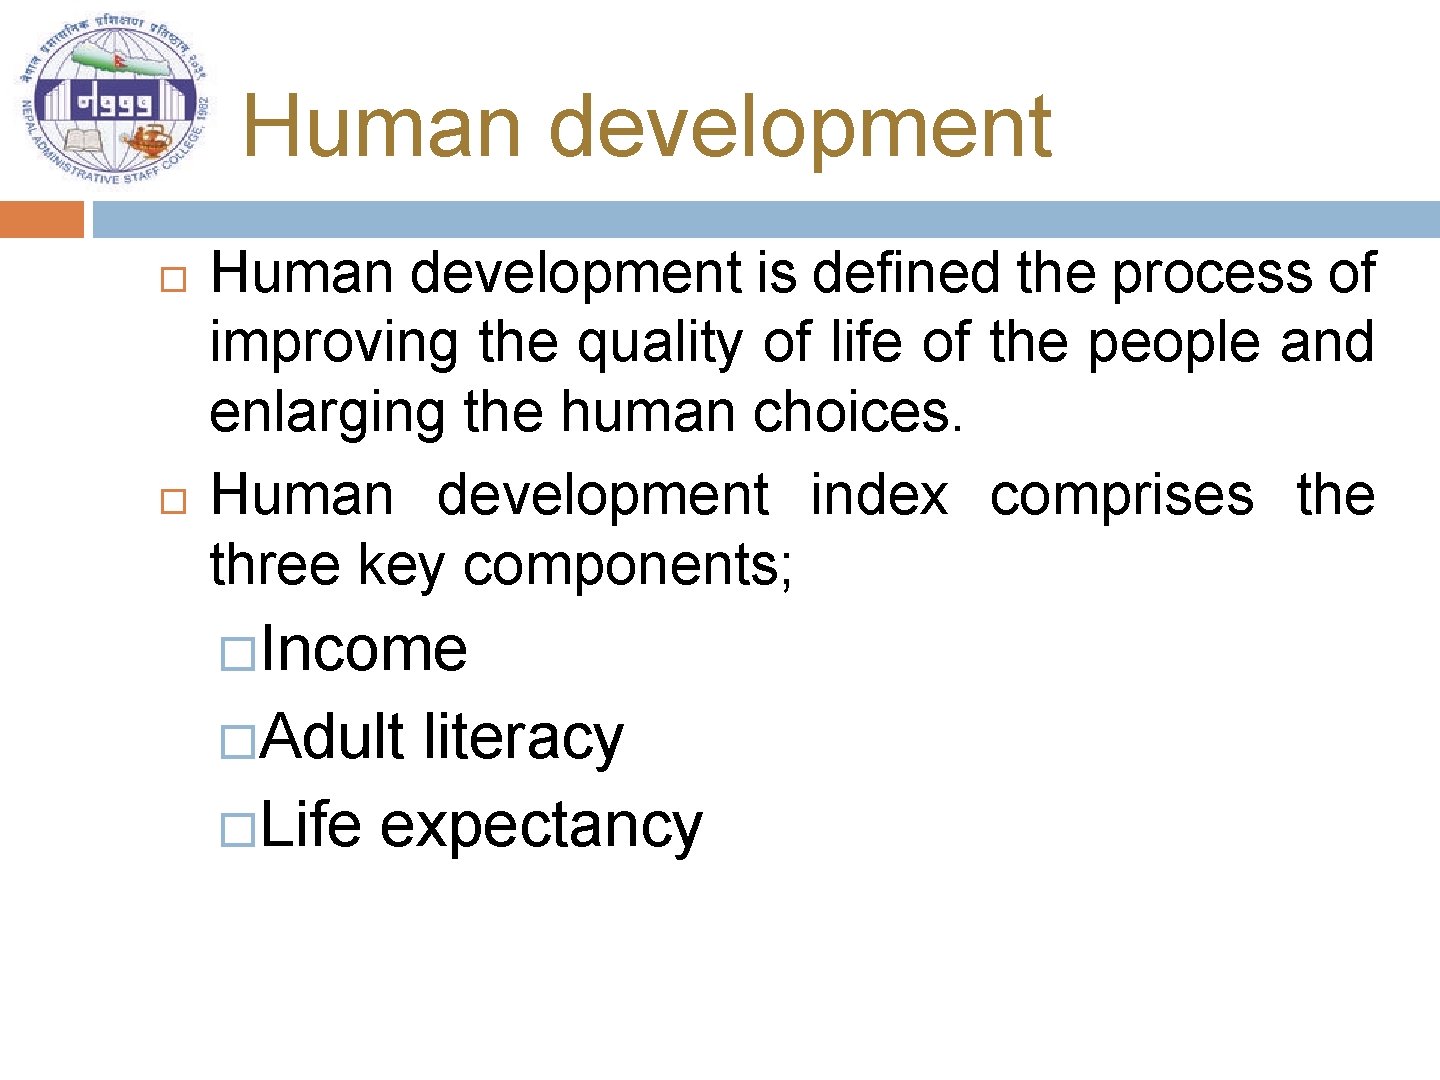 Human development is defined the process of improving the quality of life of the